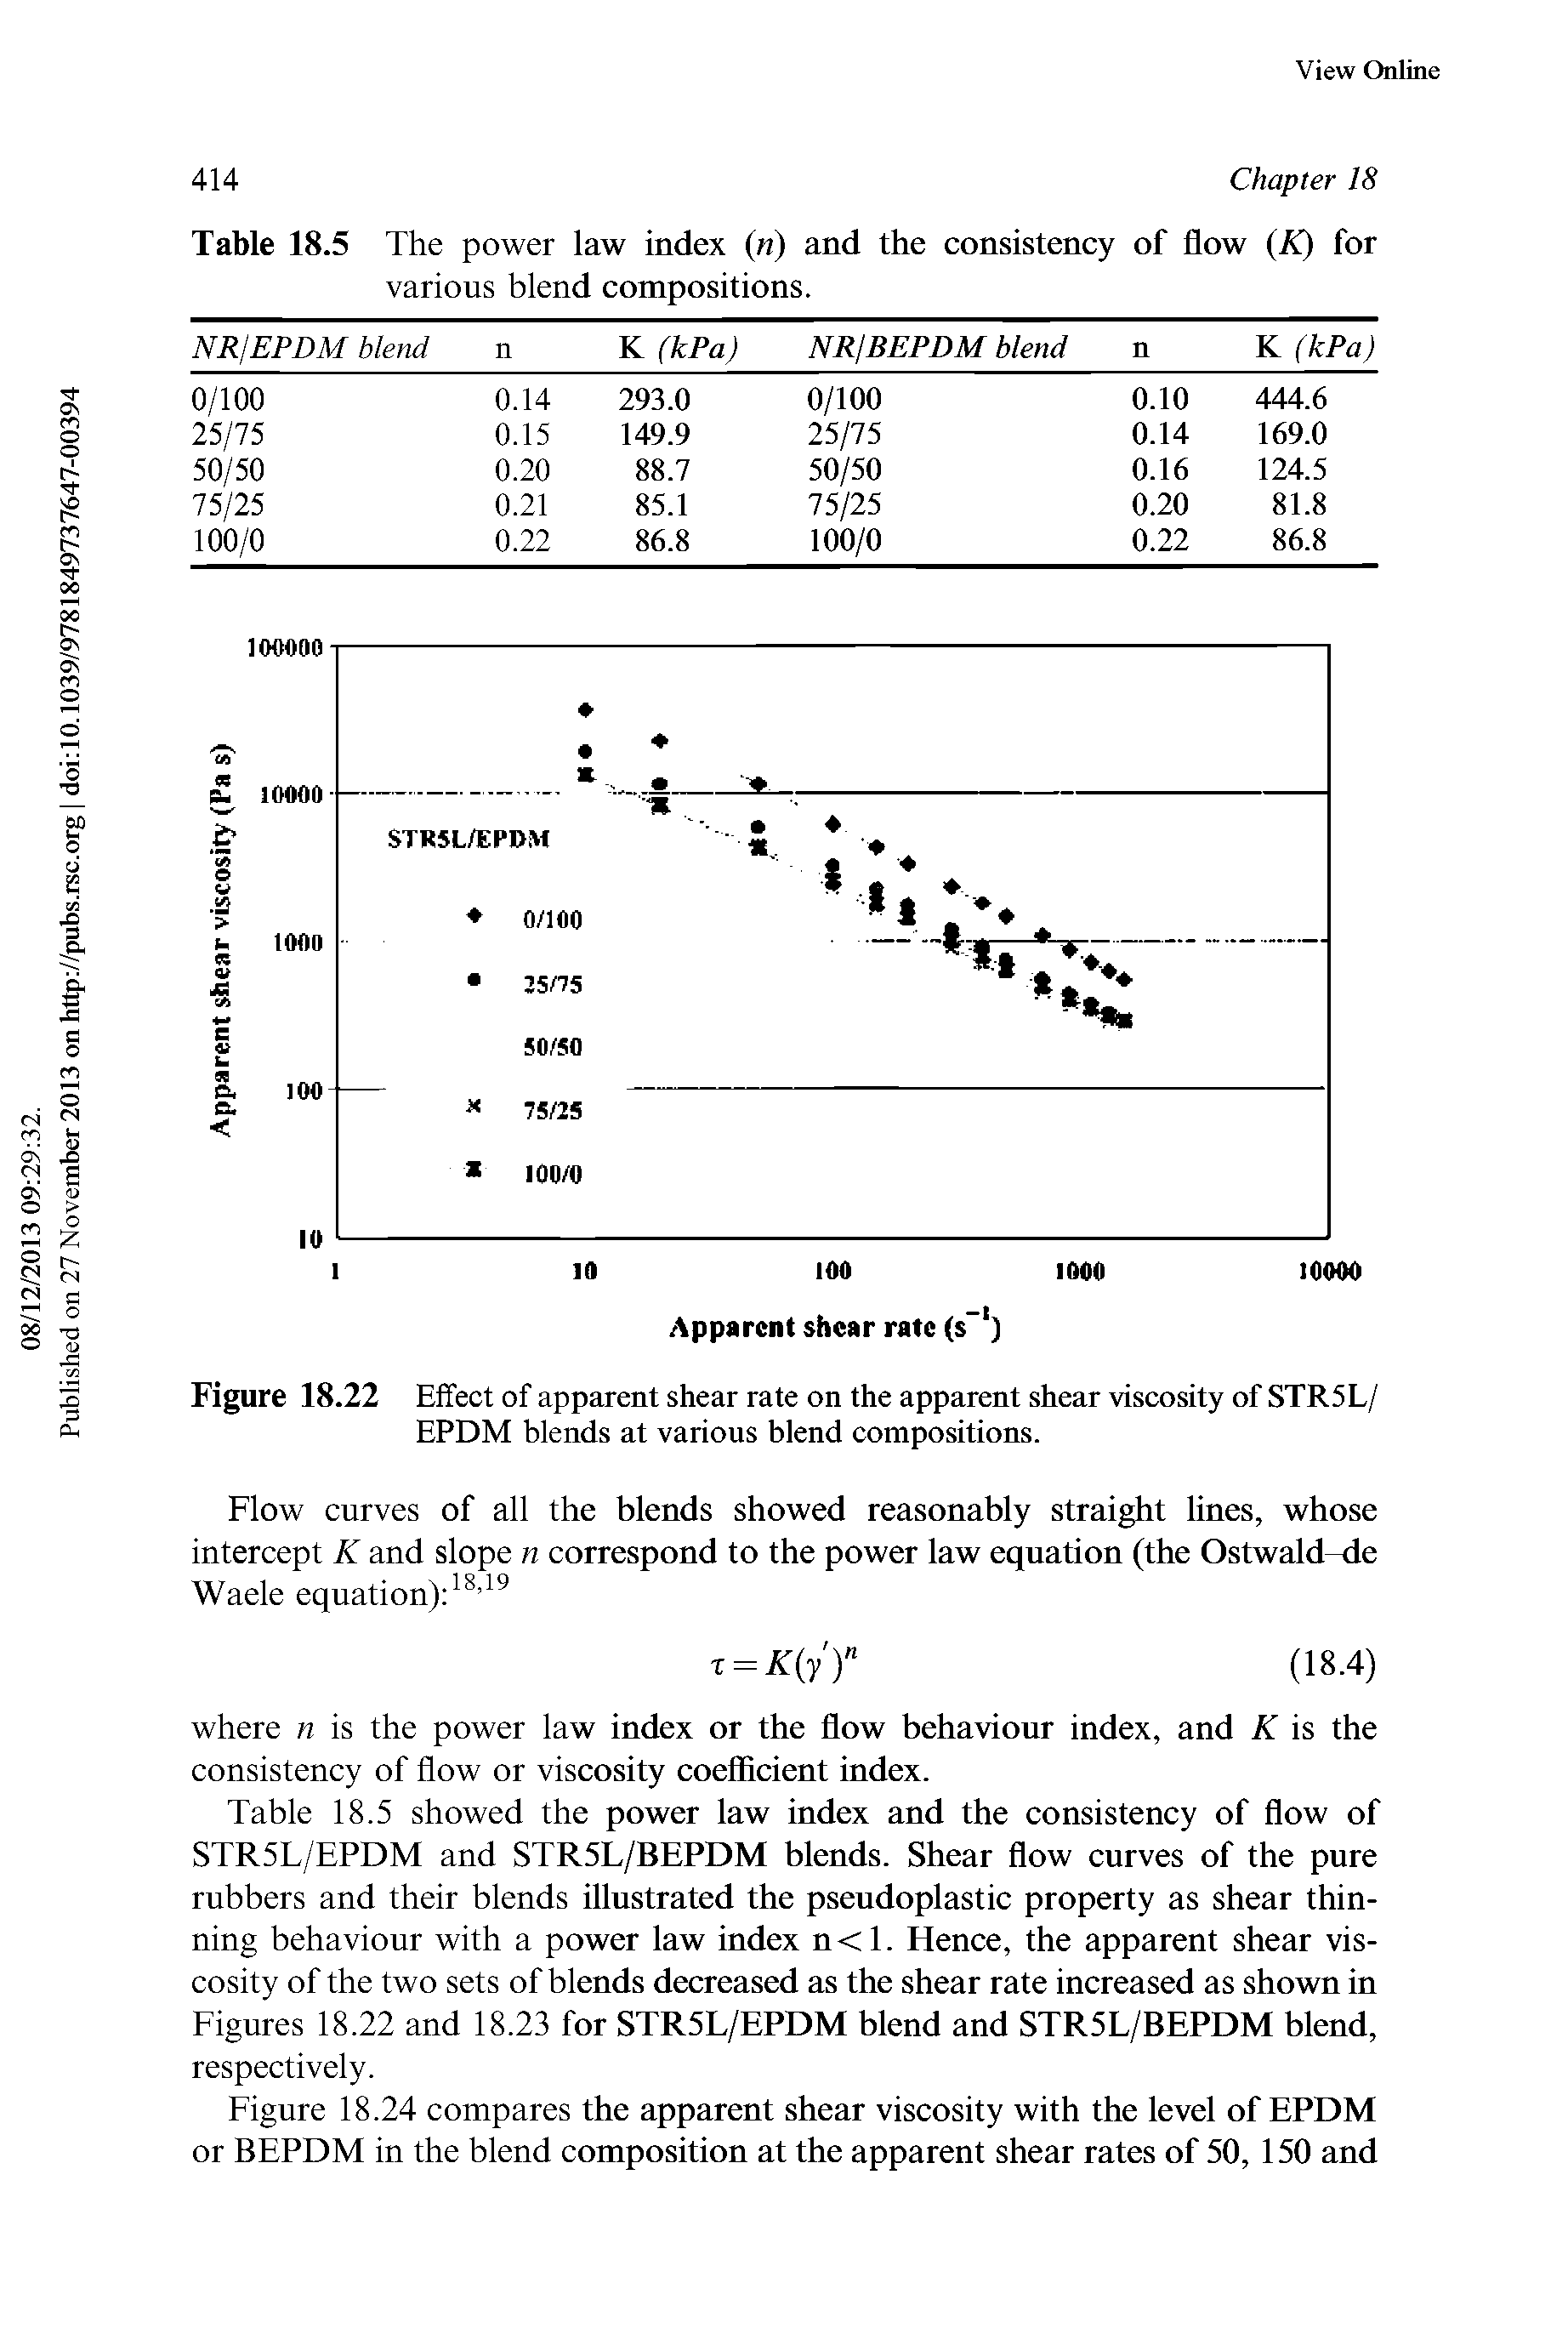 Figure 18.22 Effect of apparent shear rate on the apparent shear viscosity of STR5L/ EPDM blends at various blend compositions.